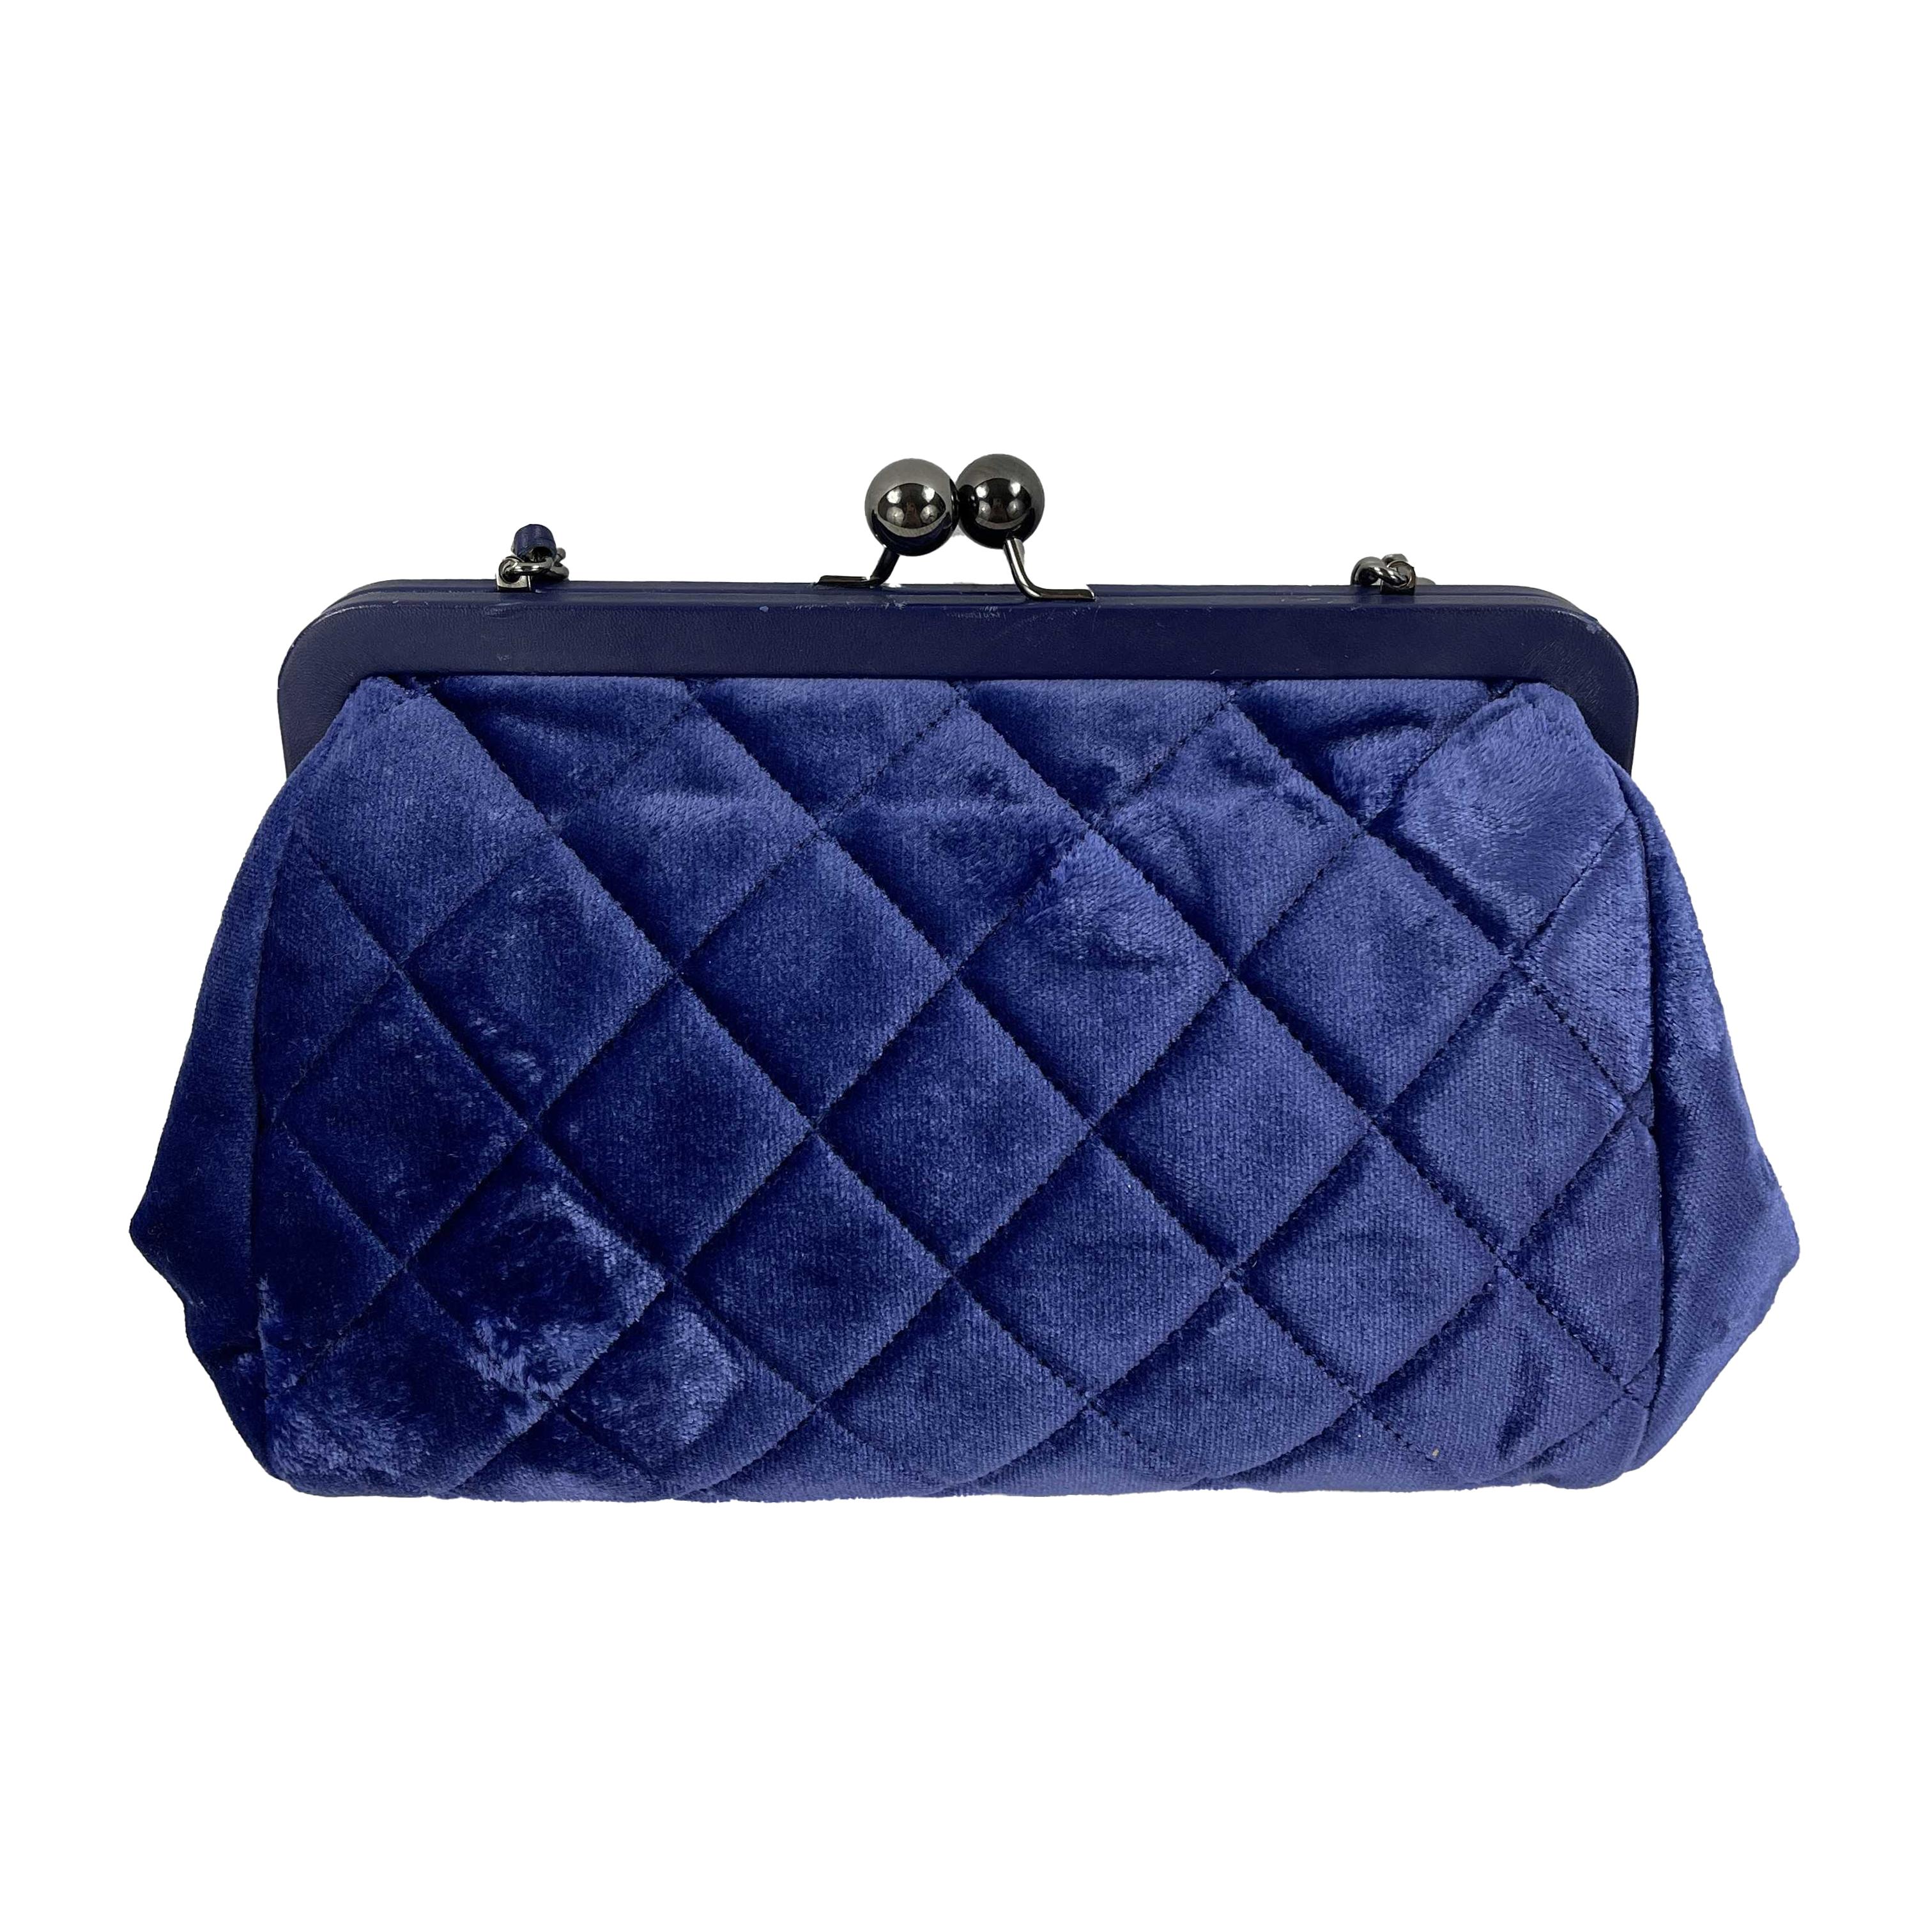 CHANEL - Very Good - CC Kiss-lock Velvet Quilted Stitched Clutch/Crossbody - Blue, Ruthenium Hardware - Handbag

Description

This Chanel handbag is from the 2014-2015 collection.
It is crafted with blue velvet with quilted stitching and ruthenium